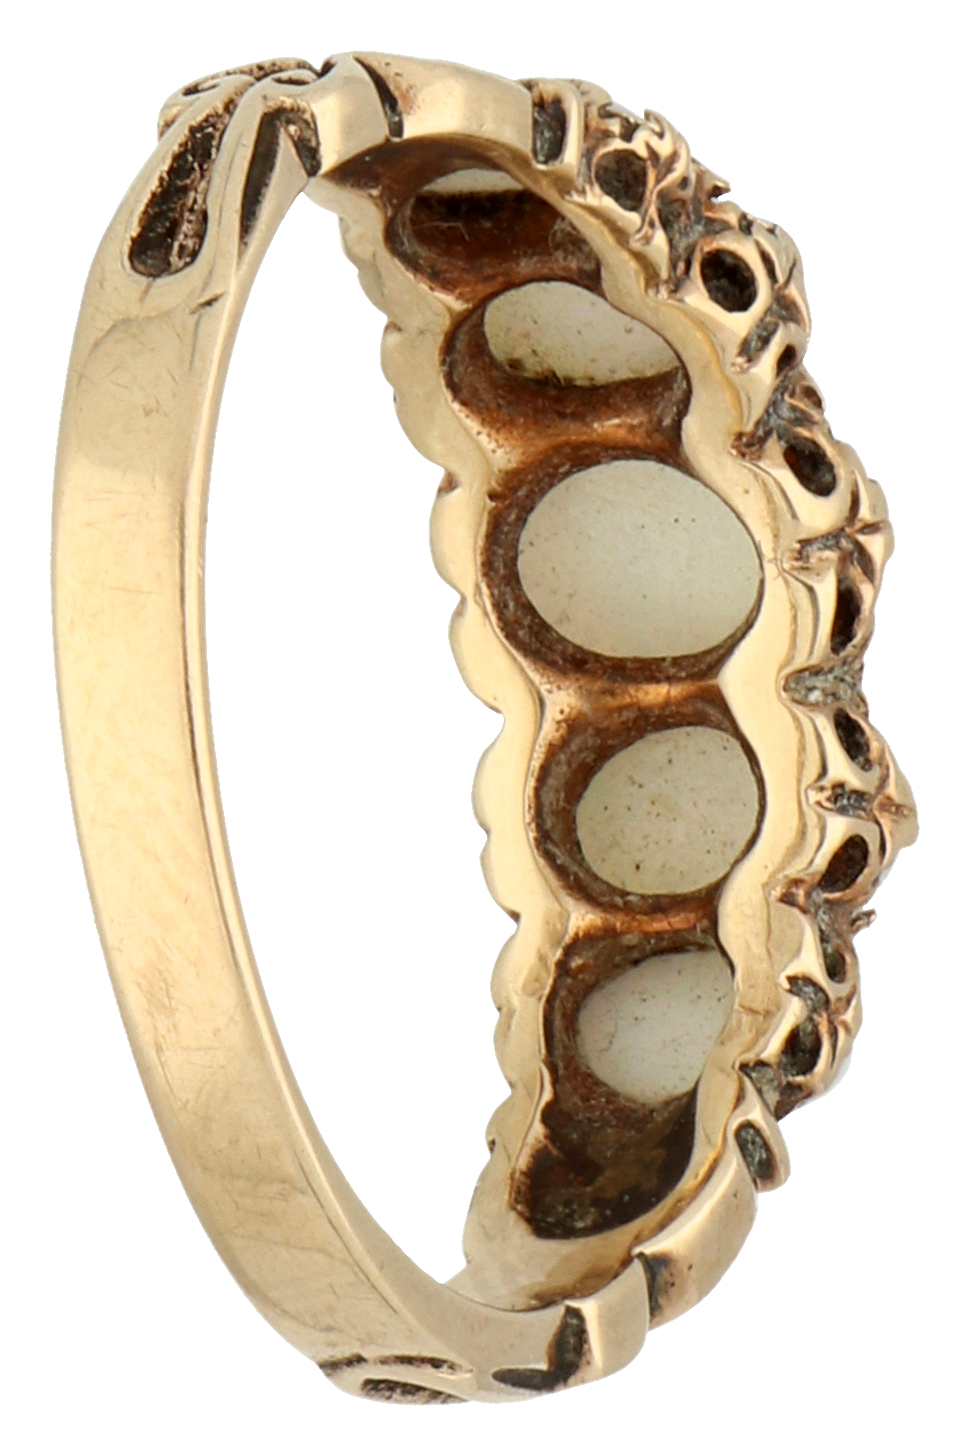 No Reserve - 9K Yellow gold five row ring with cabochon cut opals. - Image 2 of 4